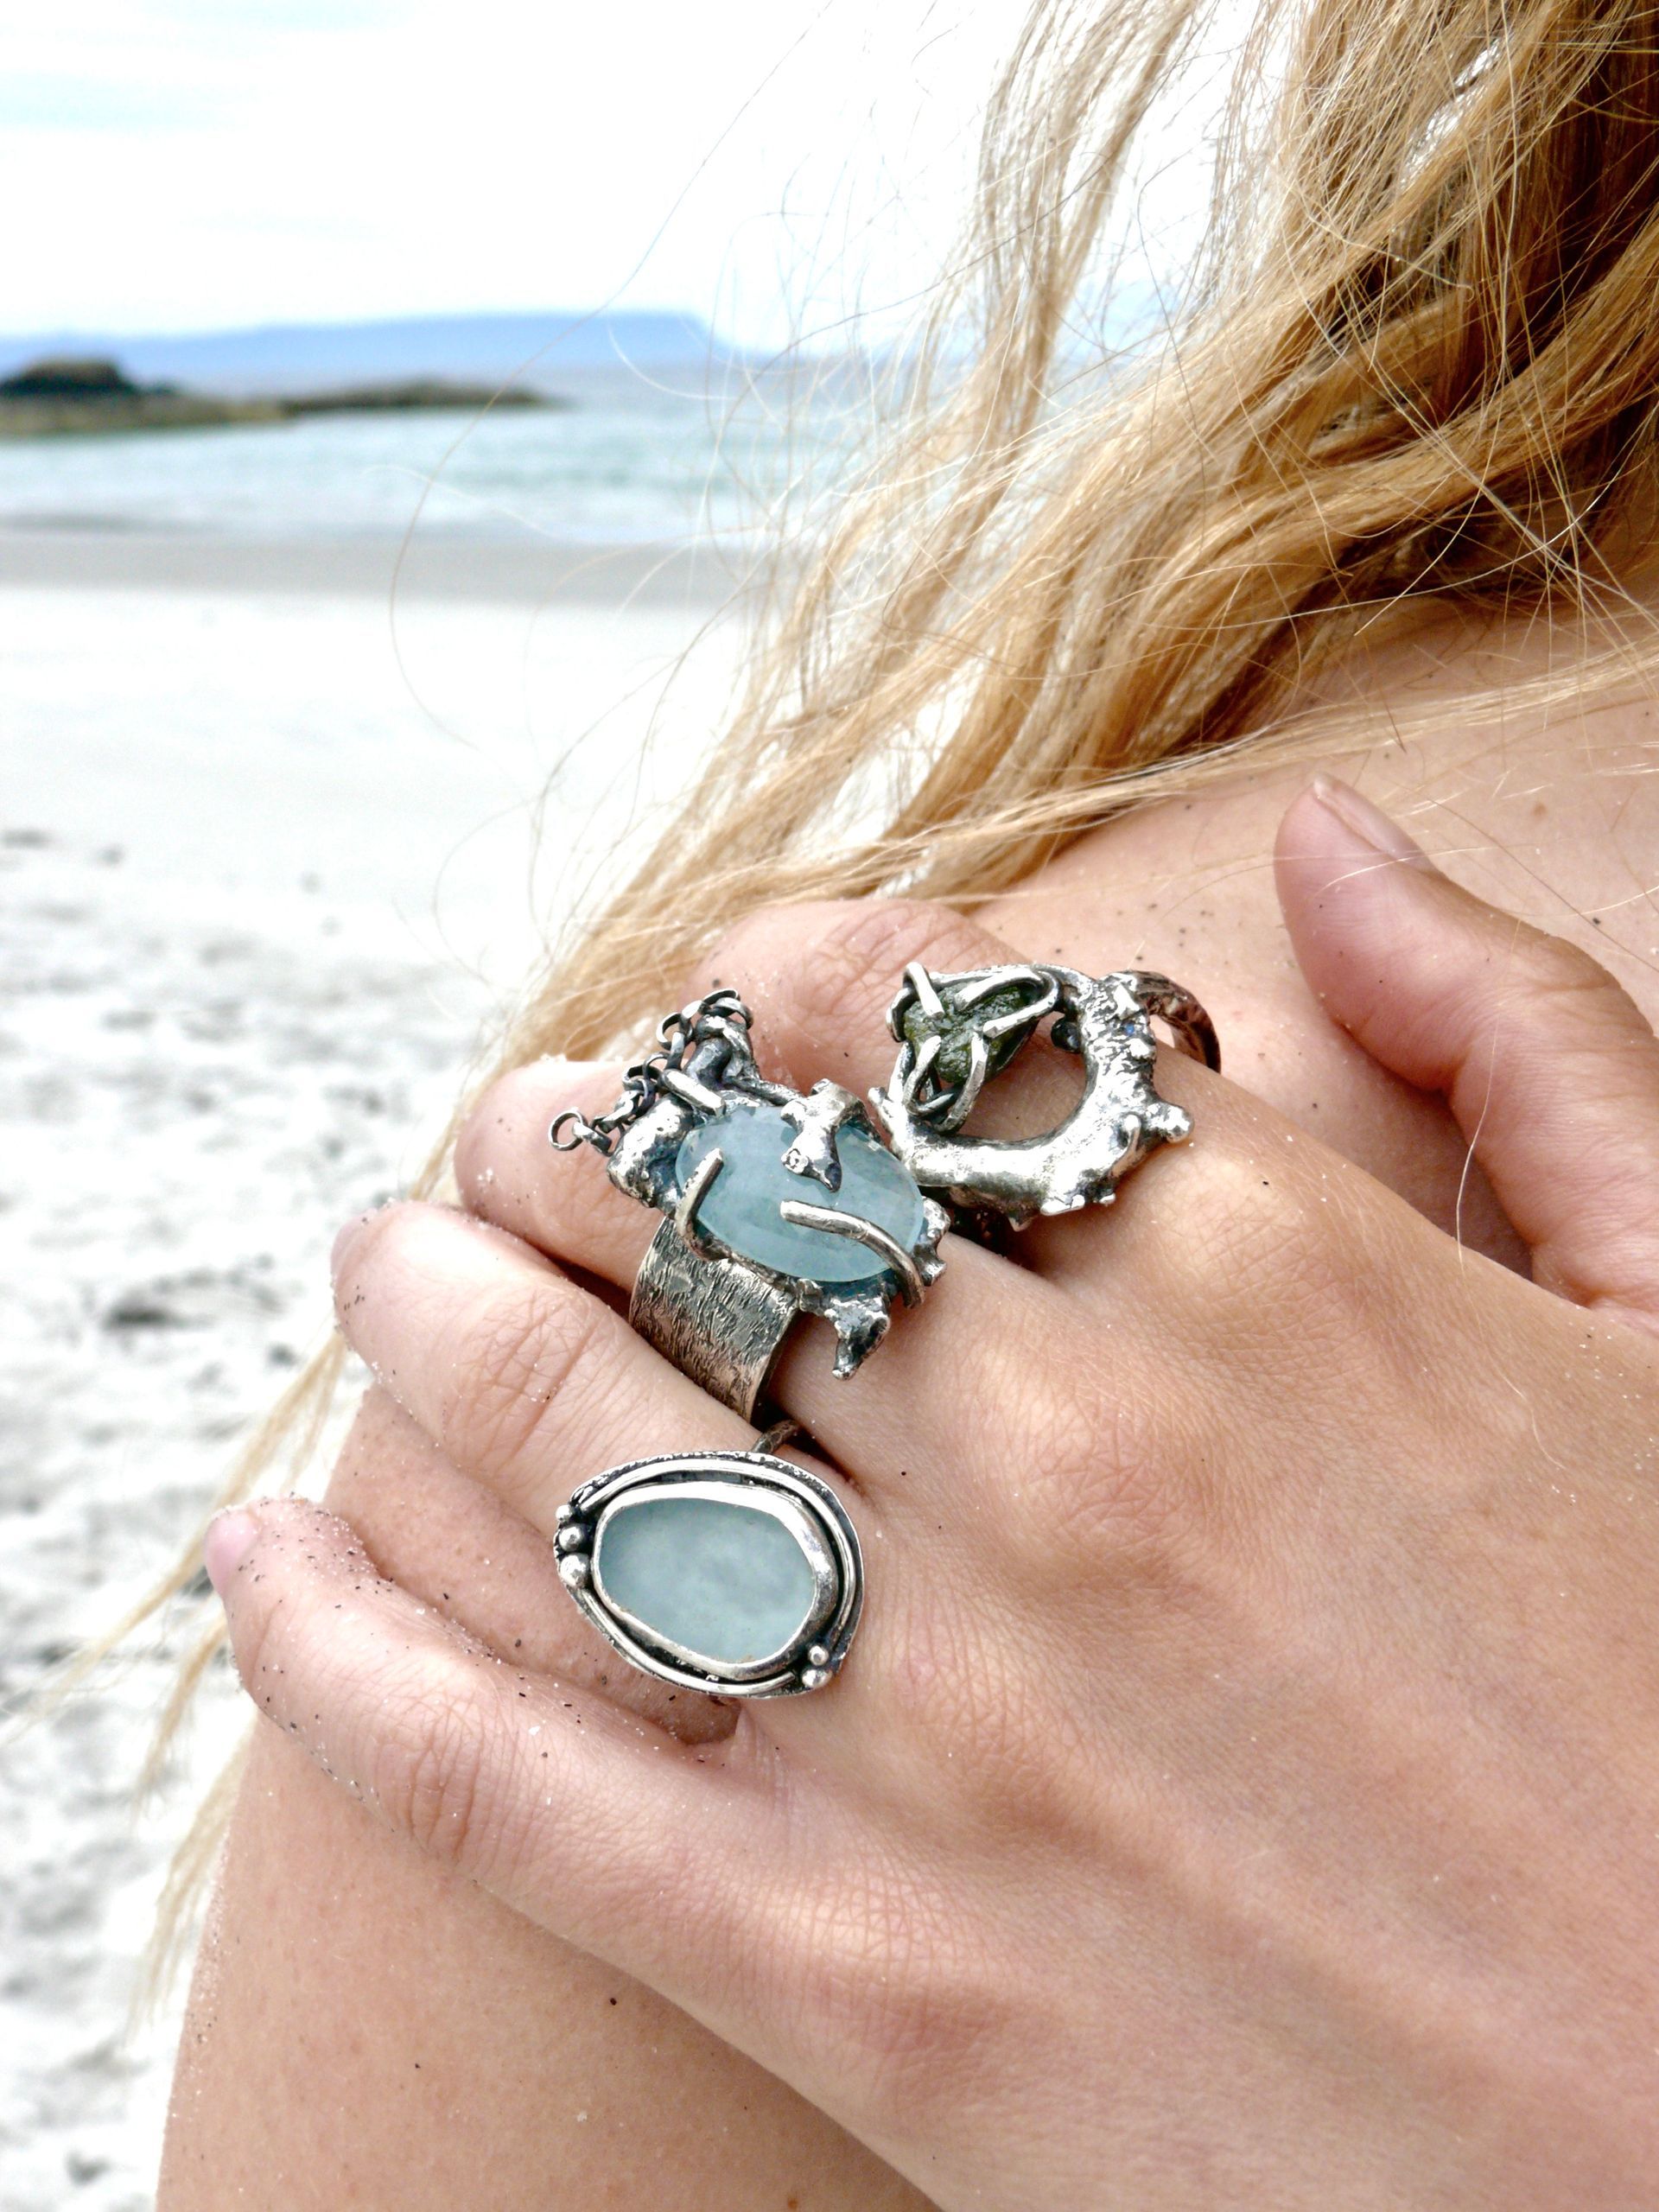 Sea glass and ethically sourced gemstone rings and jewellery. Female model on scottish beach wearing handmade sea glass jewellery from scotland